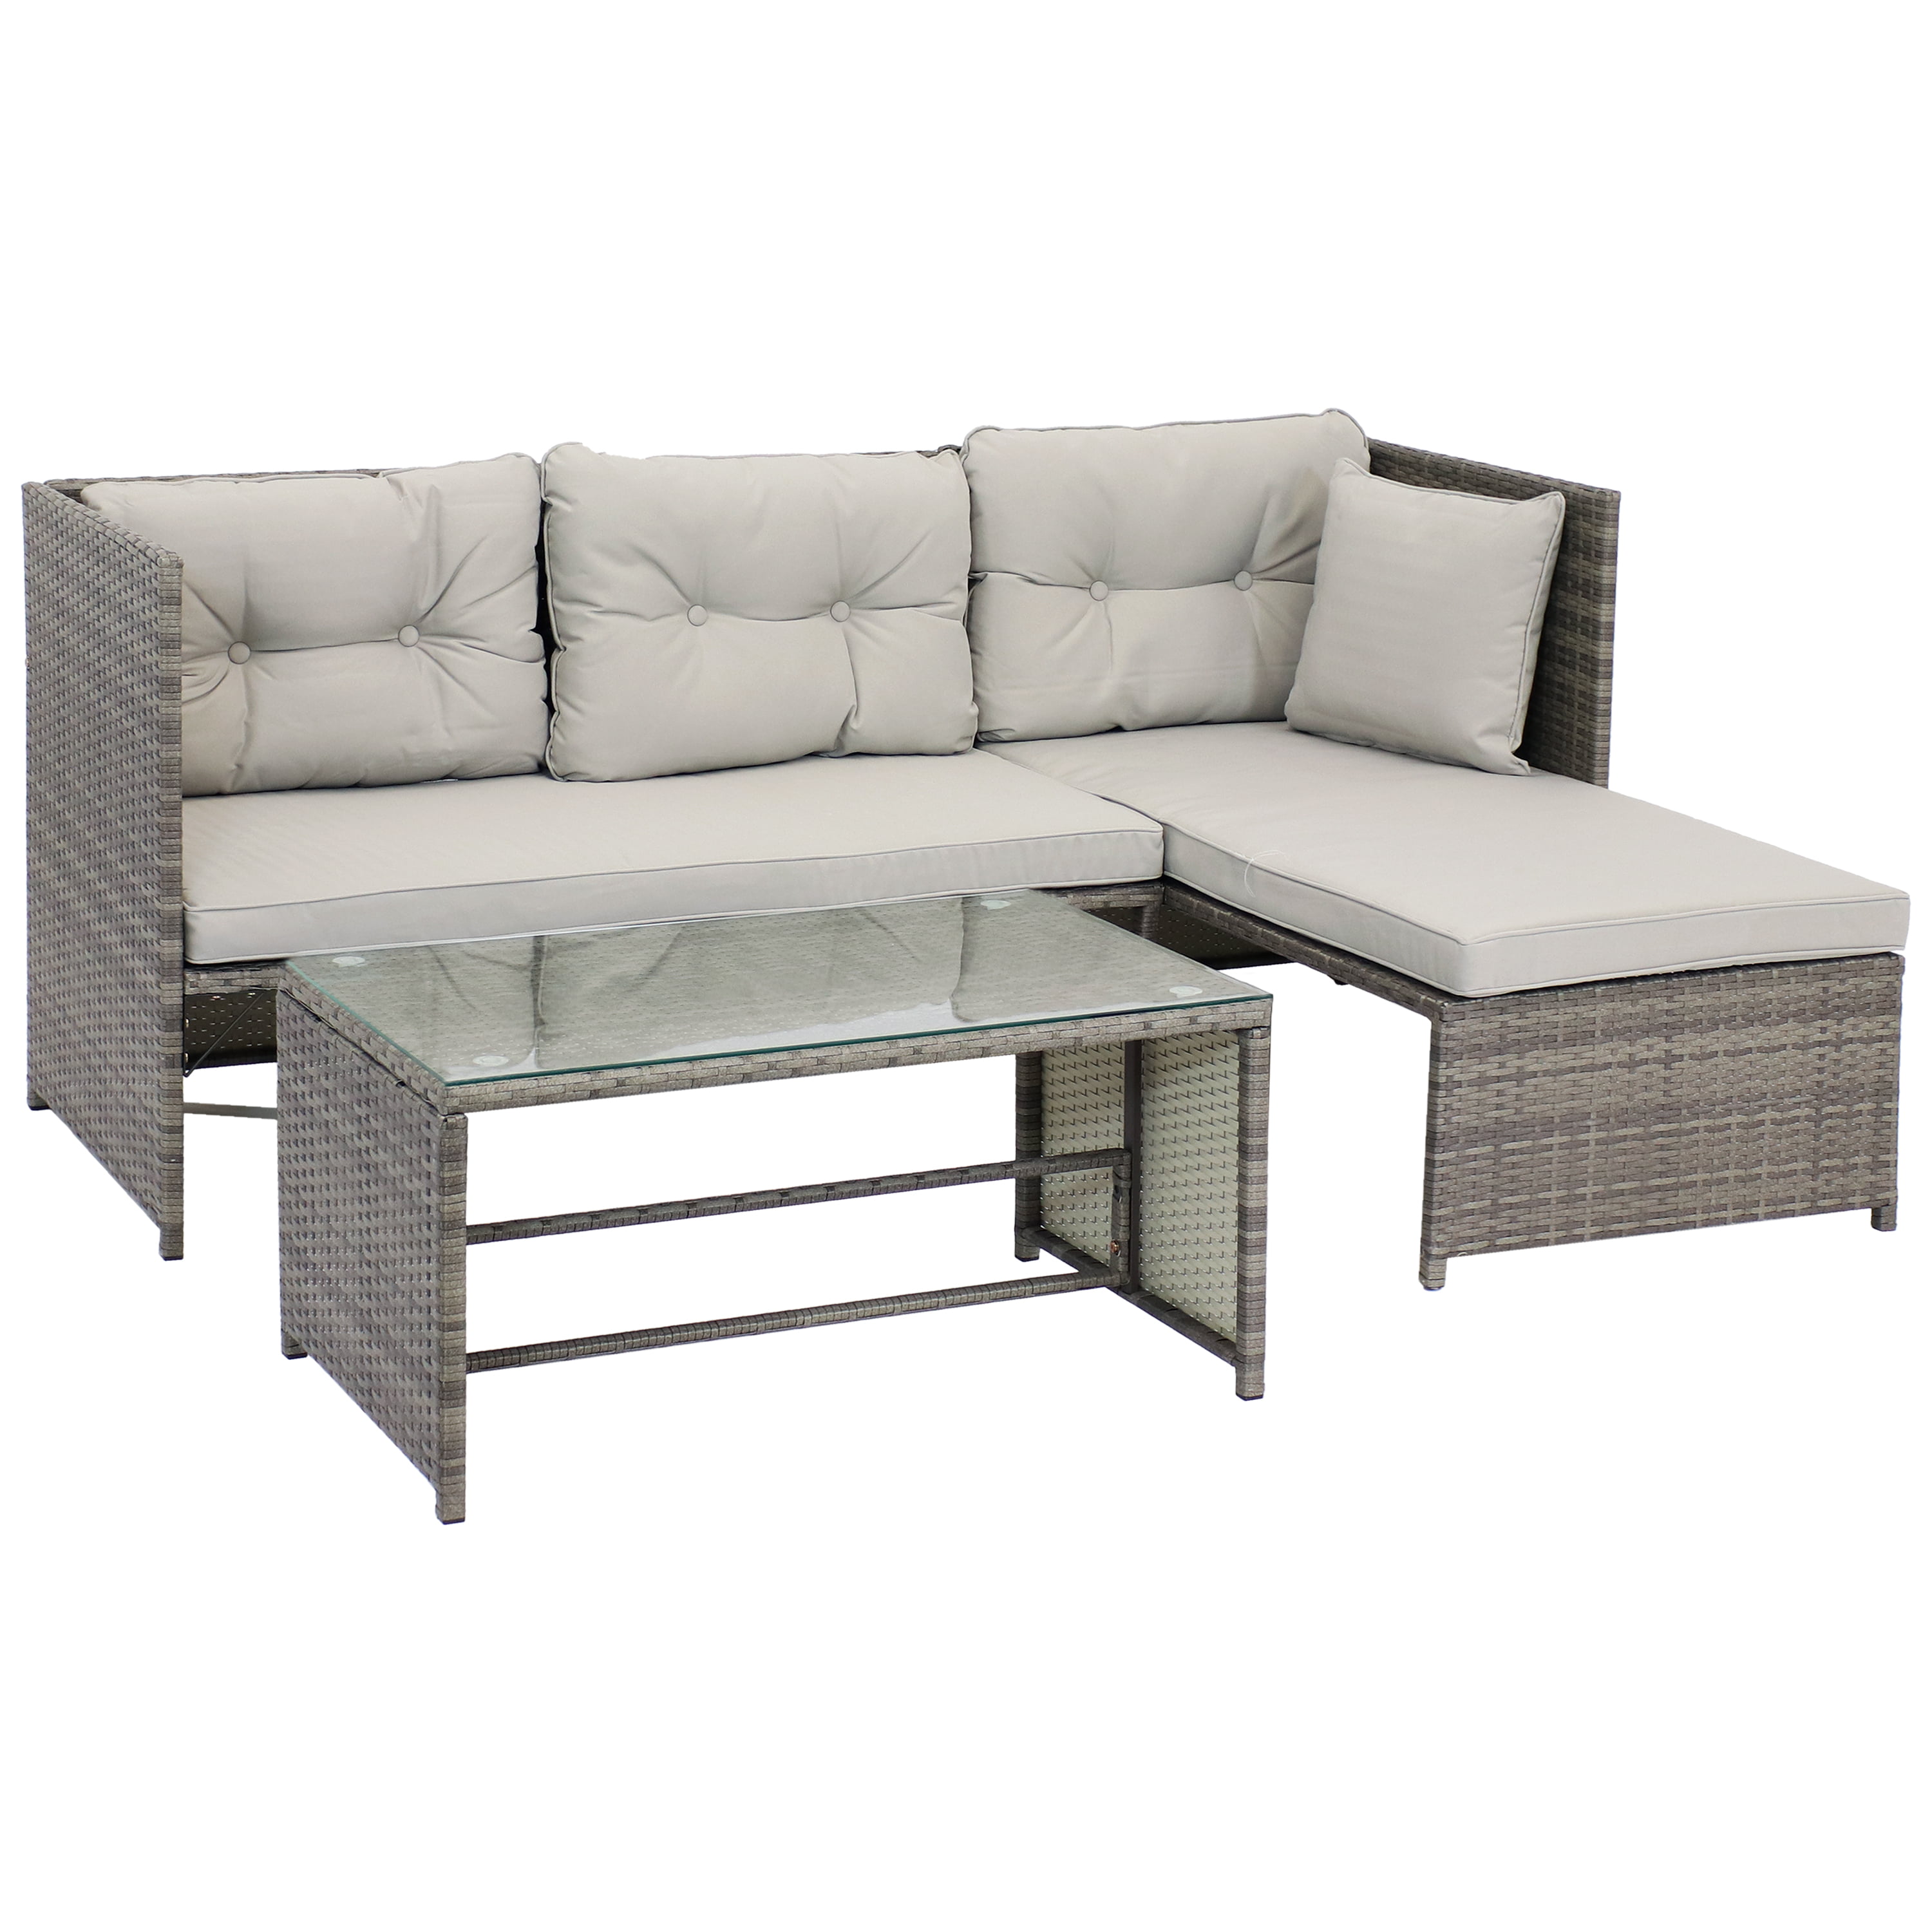 Sunnydaze Longford Outdoor Patio Sectional Sofa Set with Cushions - Stone Gray - image 1 of 12